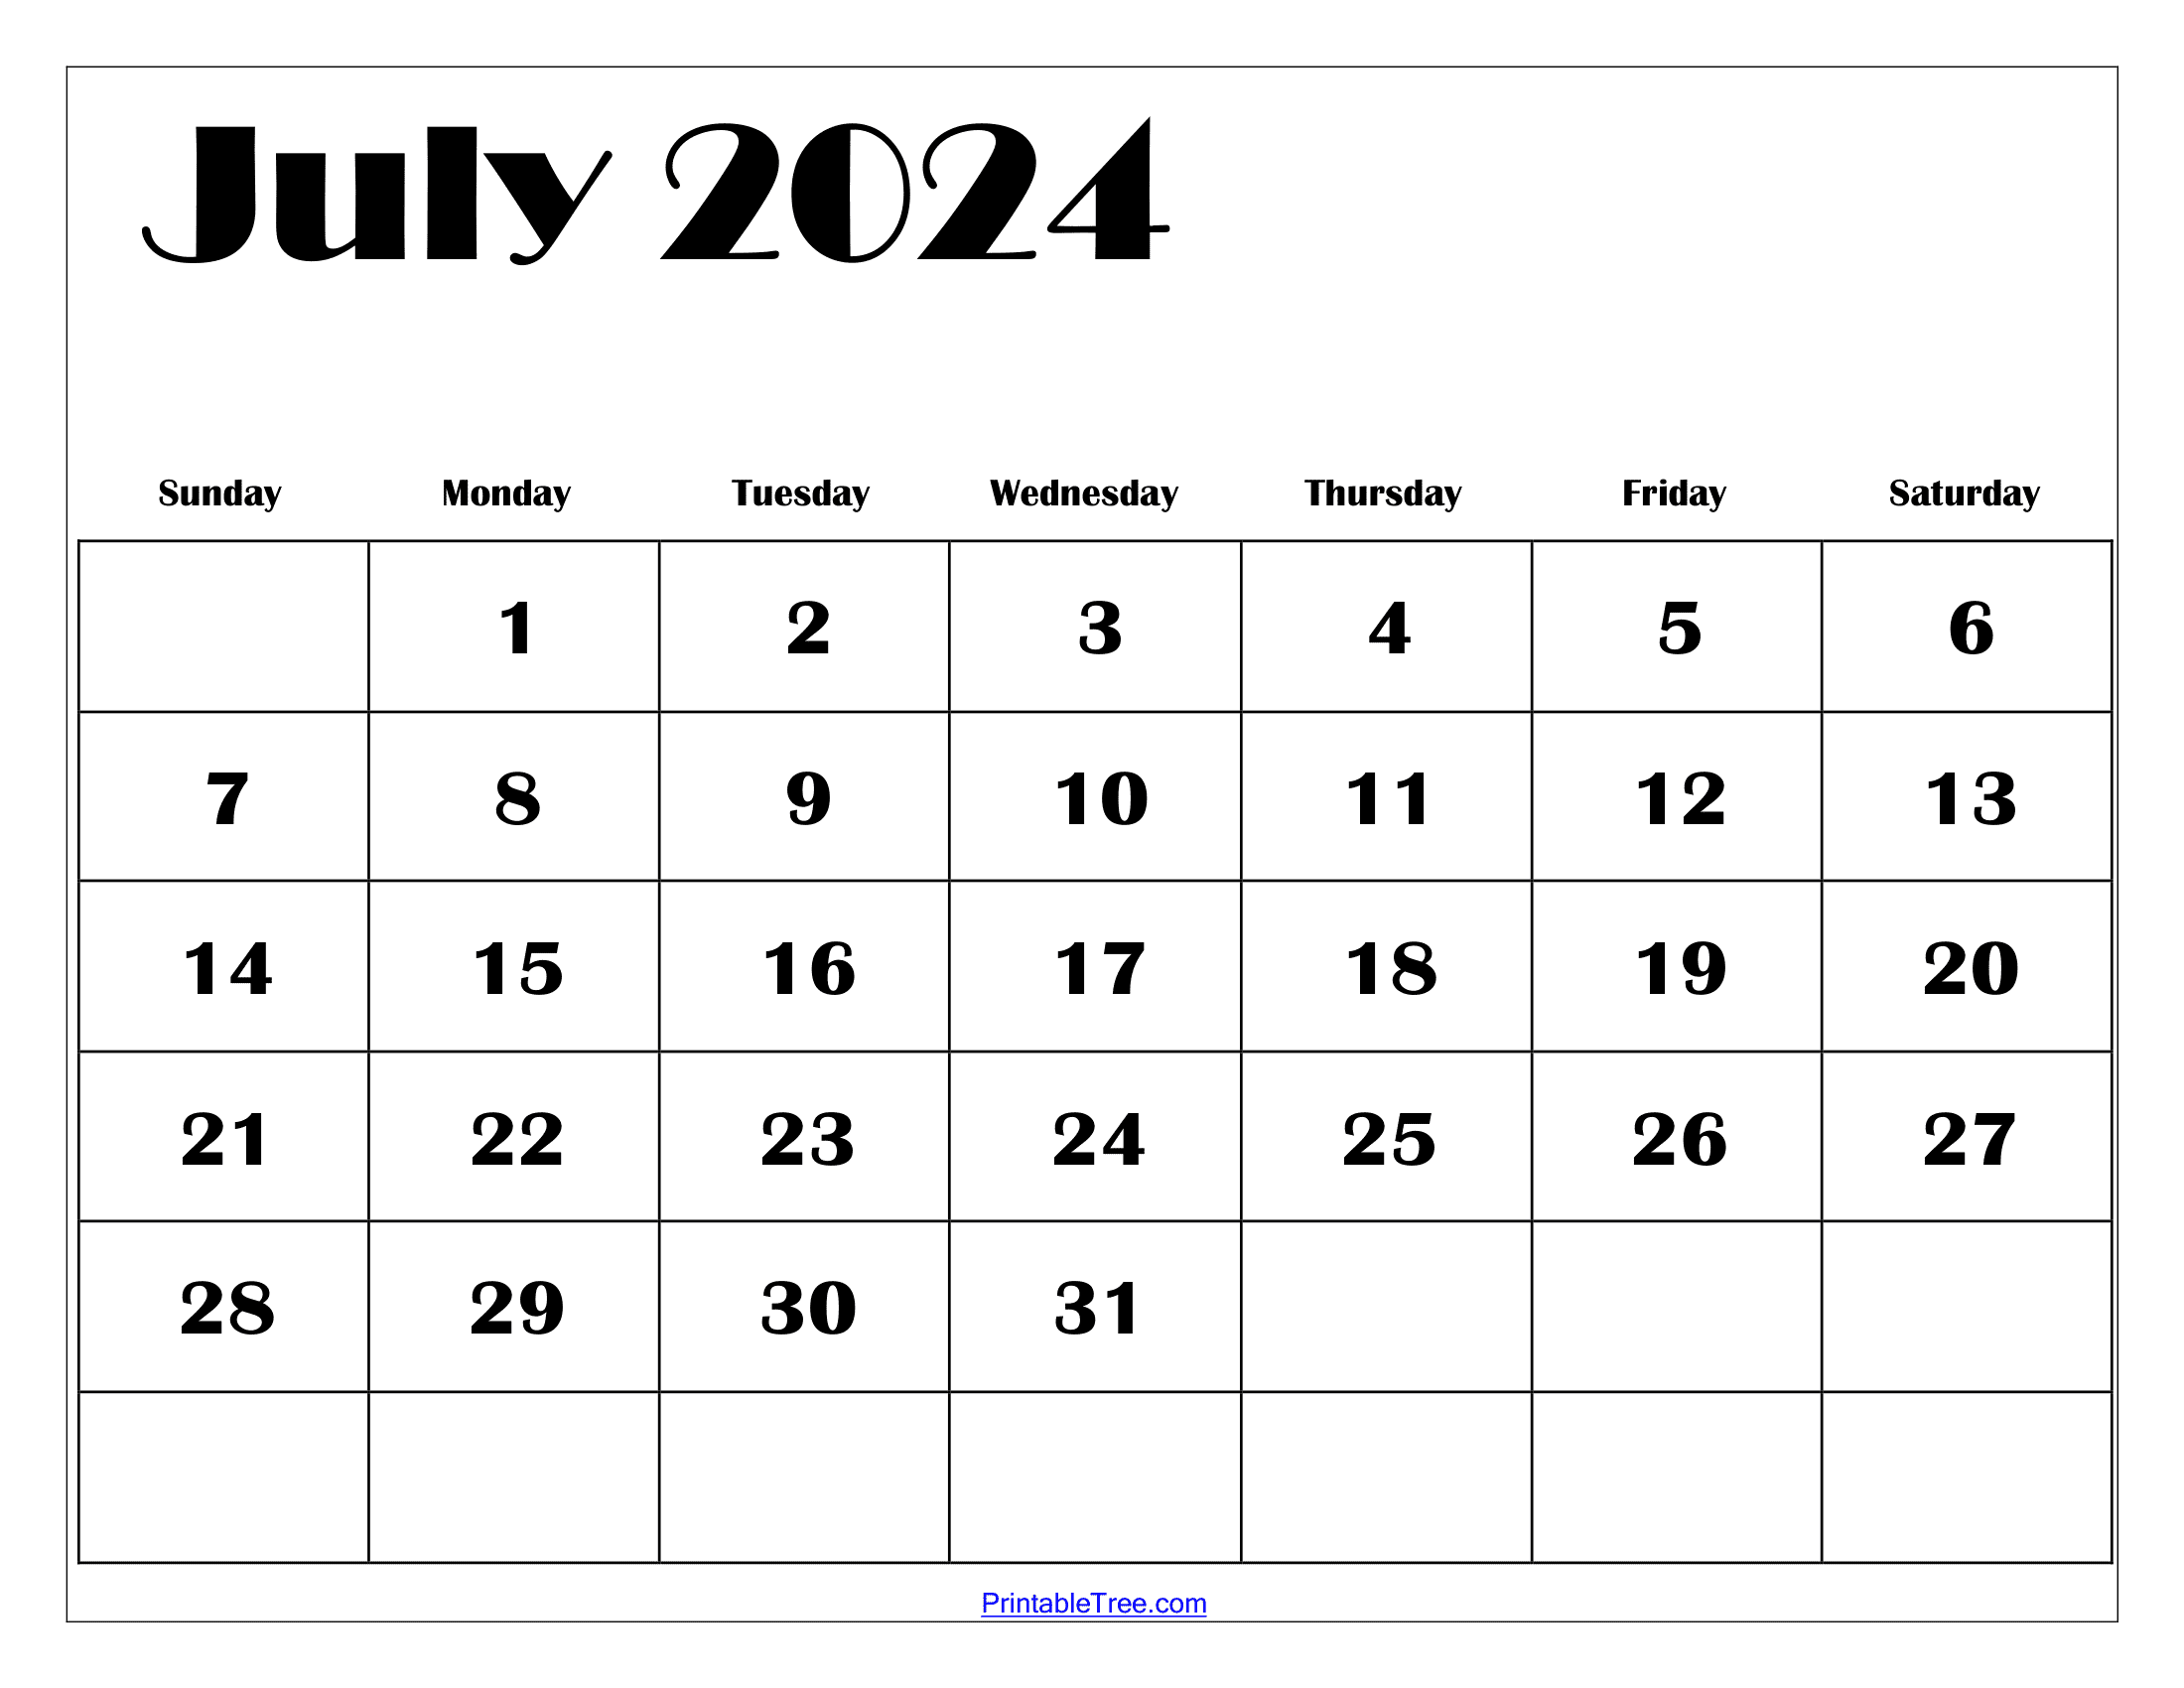 July 2024 Calendar Printable Pdf With Holidays Free Template for June And July 2024 Printable Calendar